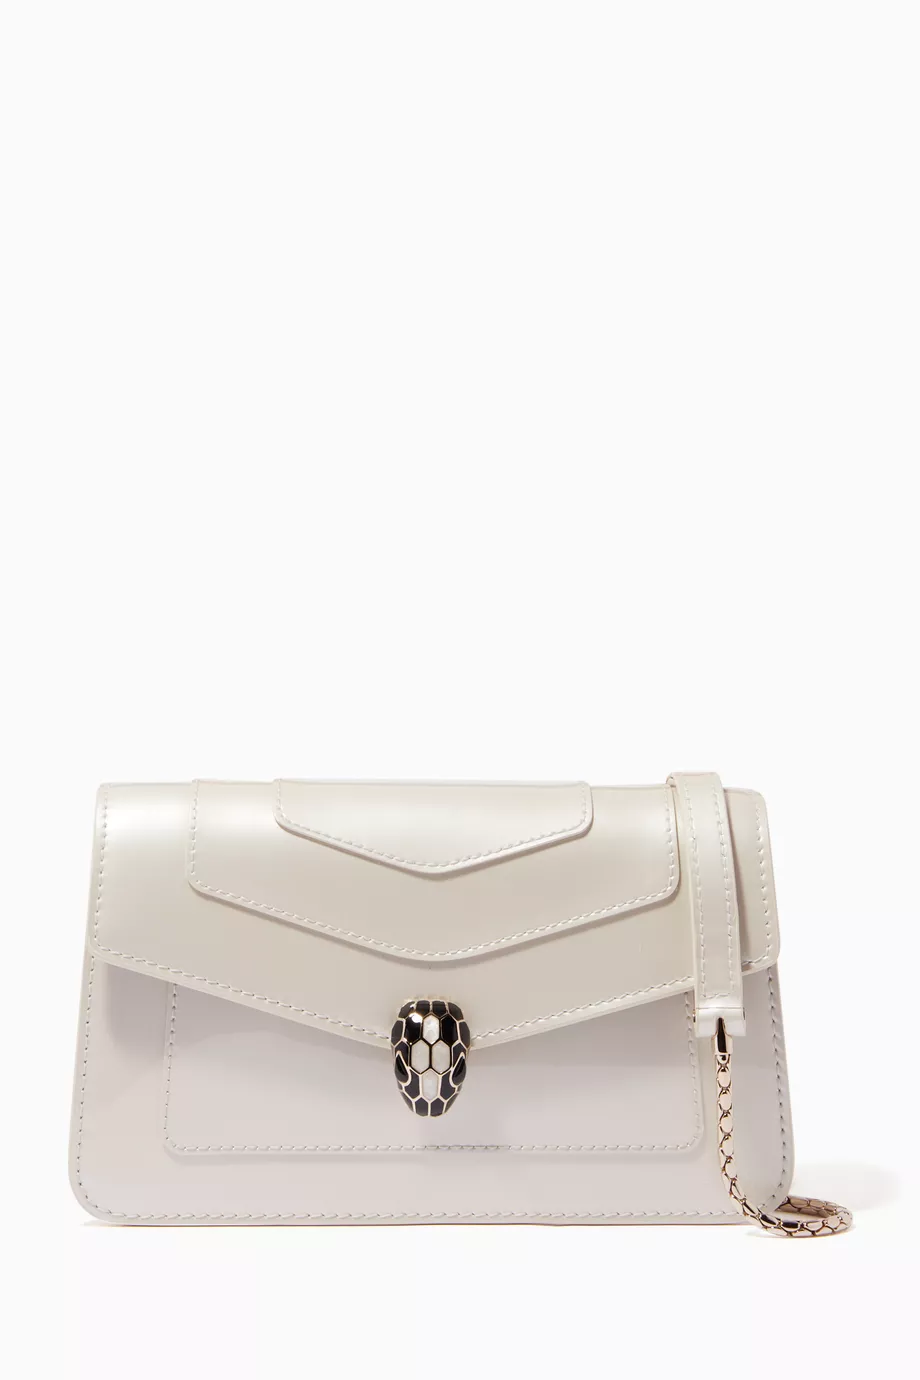 Bvlgari Serpenti Forever Wallet on Chain Leather Vertical at 1stDibs  bvlgari  wallet on chain, bvlgari serpenti wallet on chain, serpenti forever chain  wallet